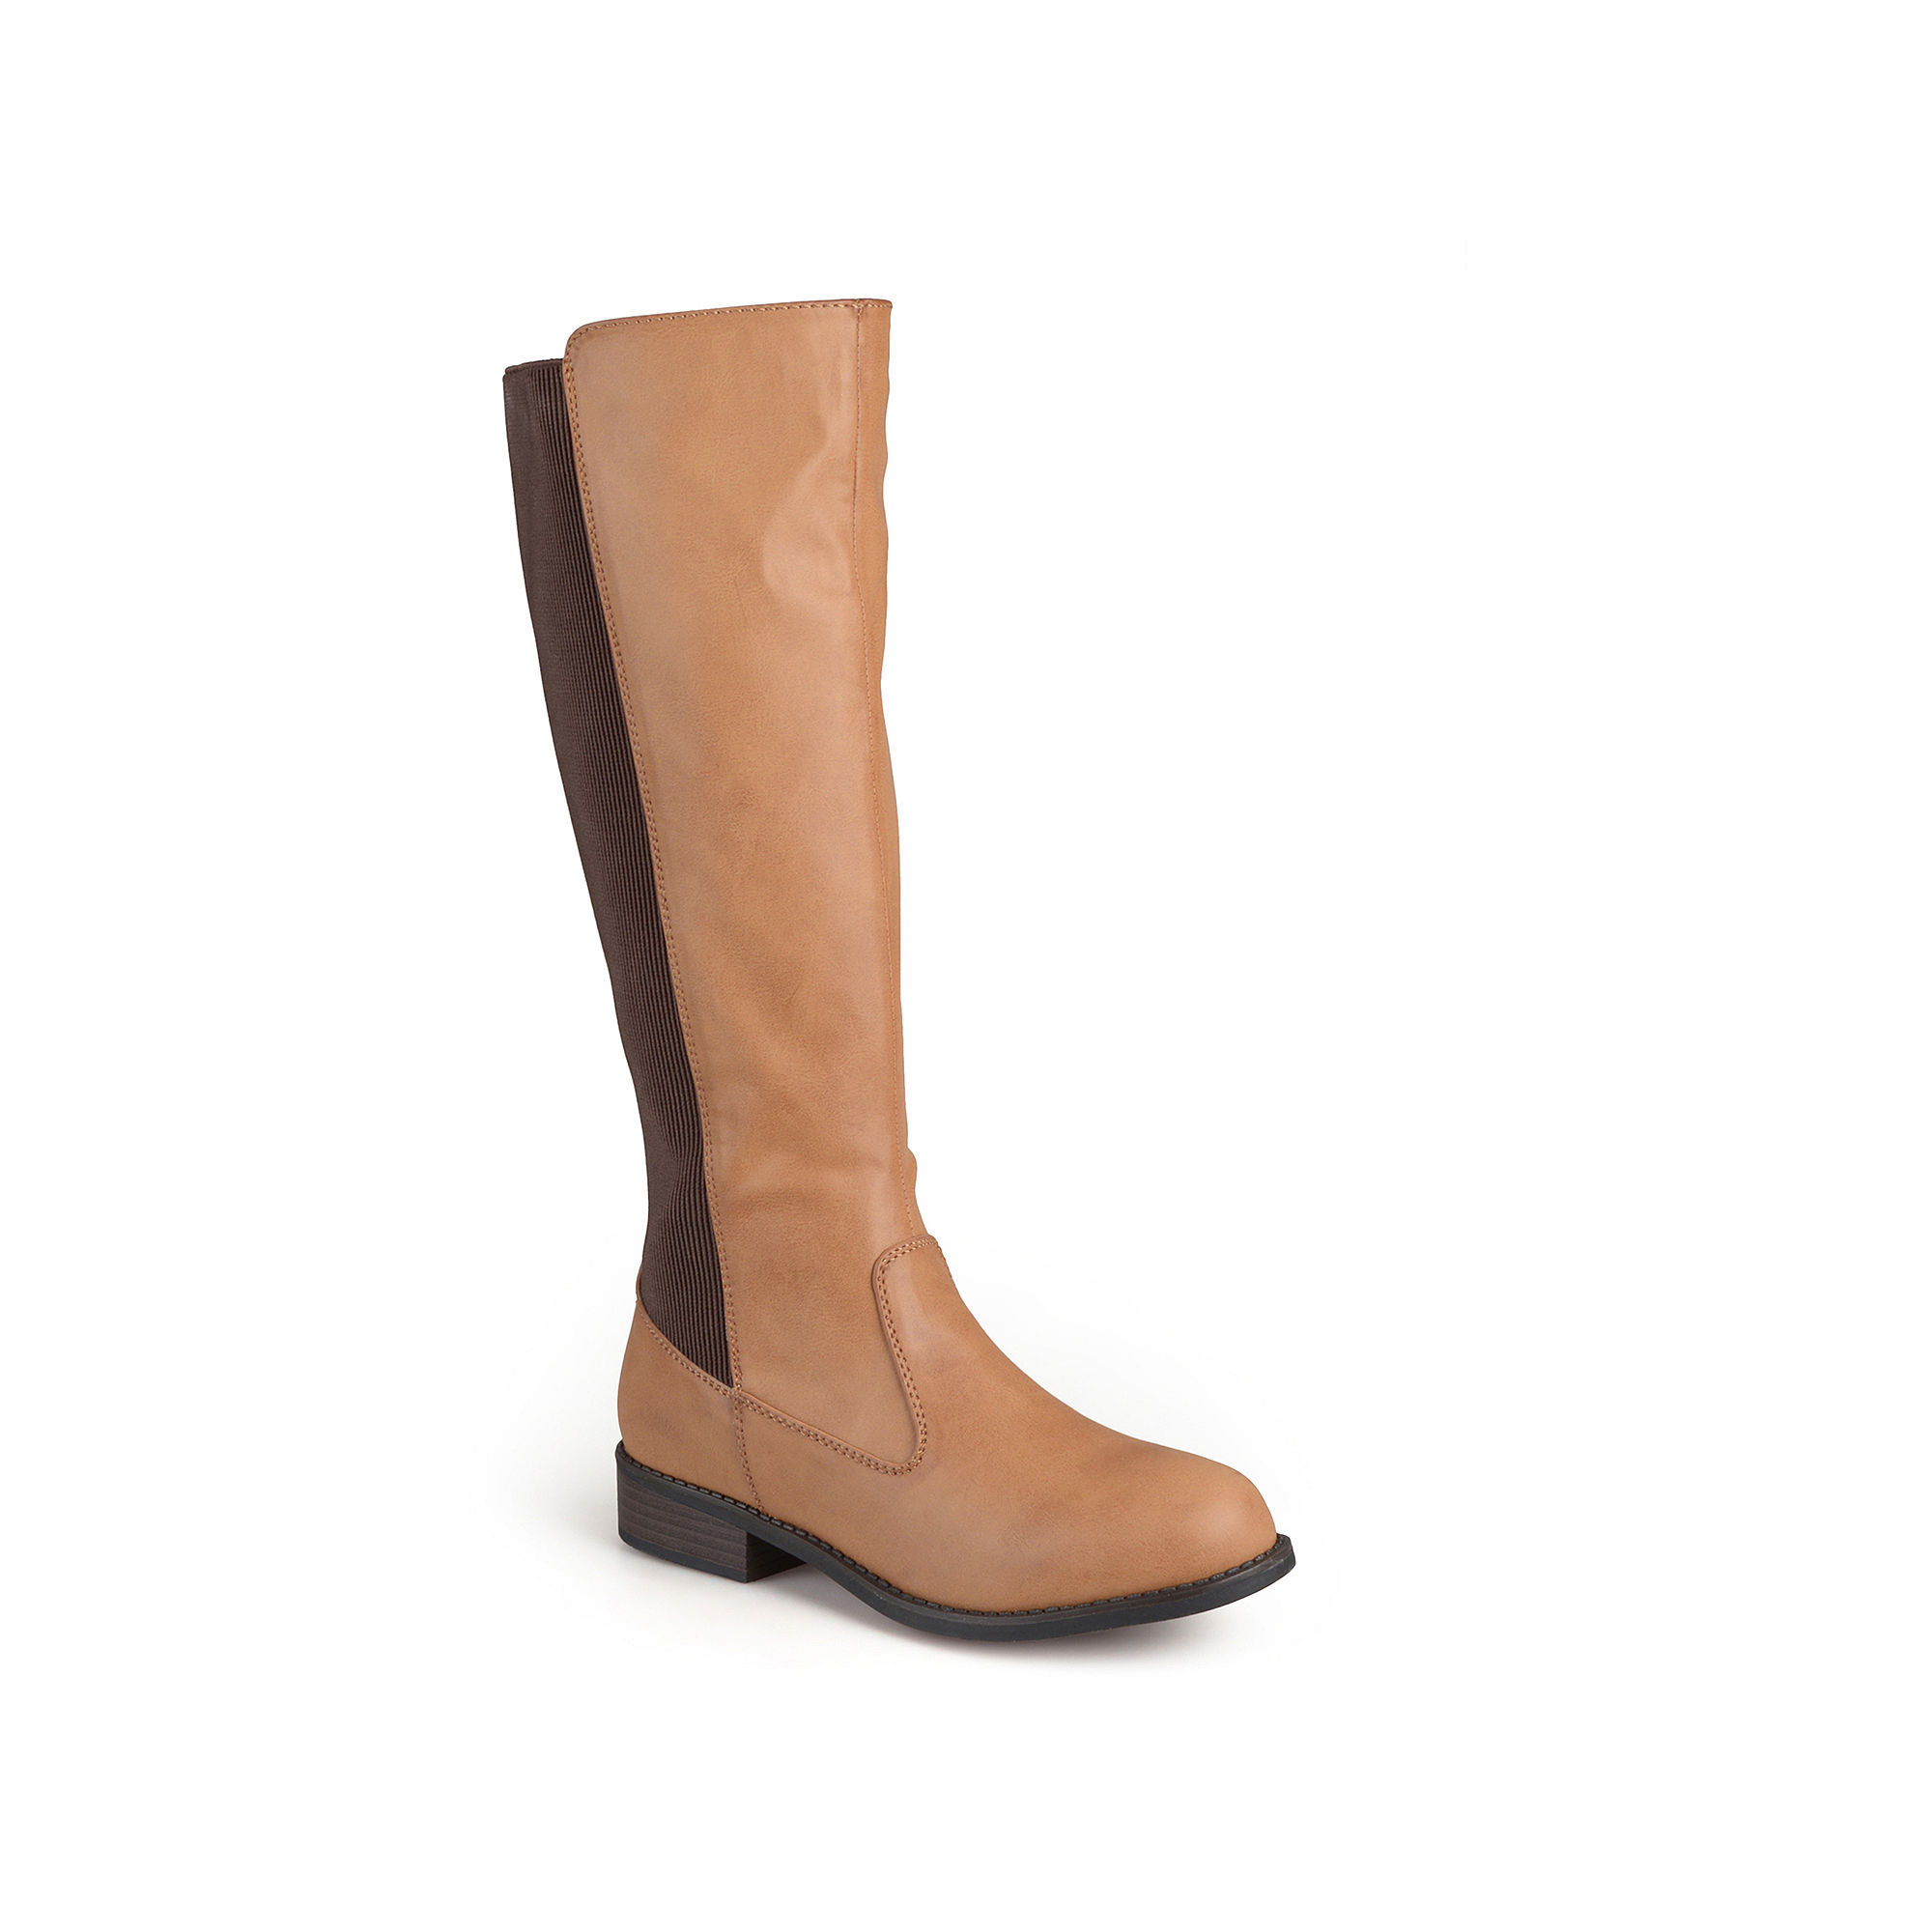 Journee Collection Light Tall Womens Riding Boots